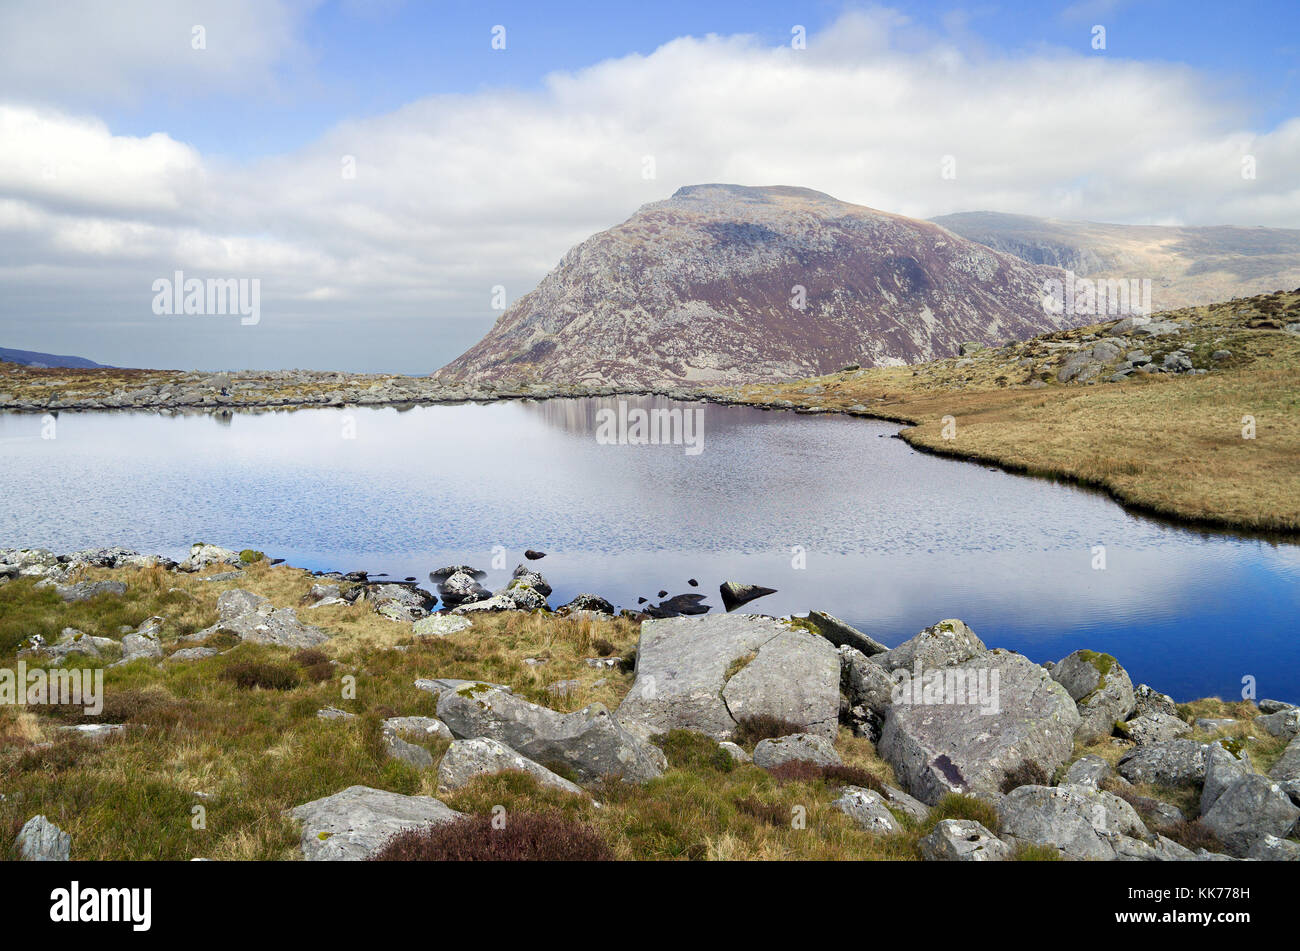 Llyn (Lake) Bochlwyd is a wild, rugged mountain lake in Snowdonia. It is in the Glyderau range and offers excellent views of the surrounding mountains. Stock Photo